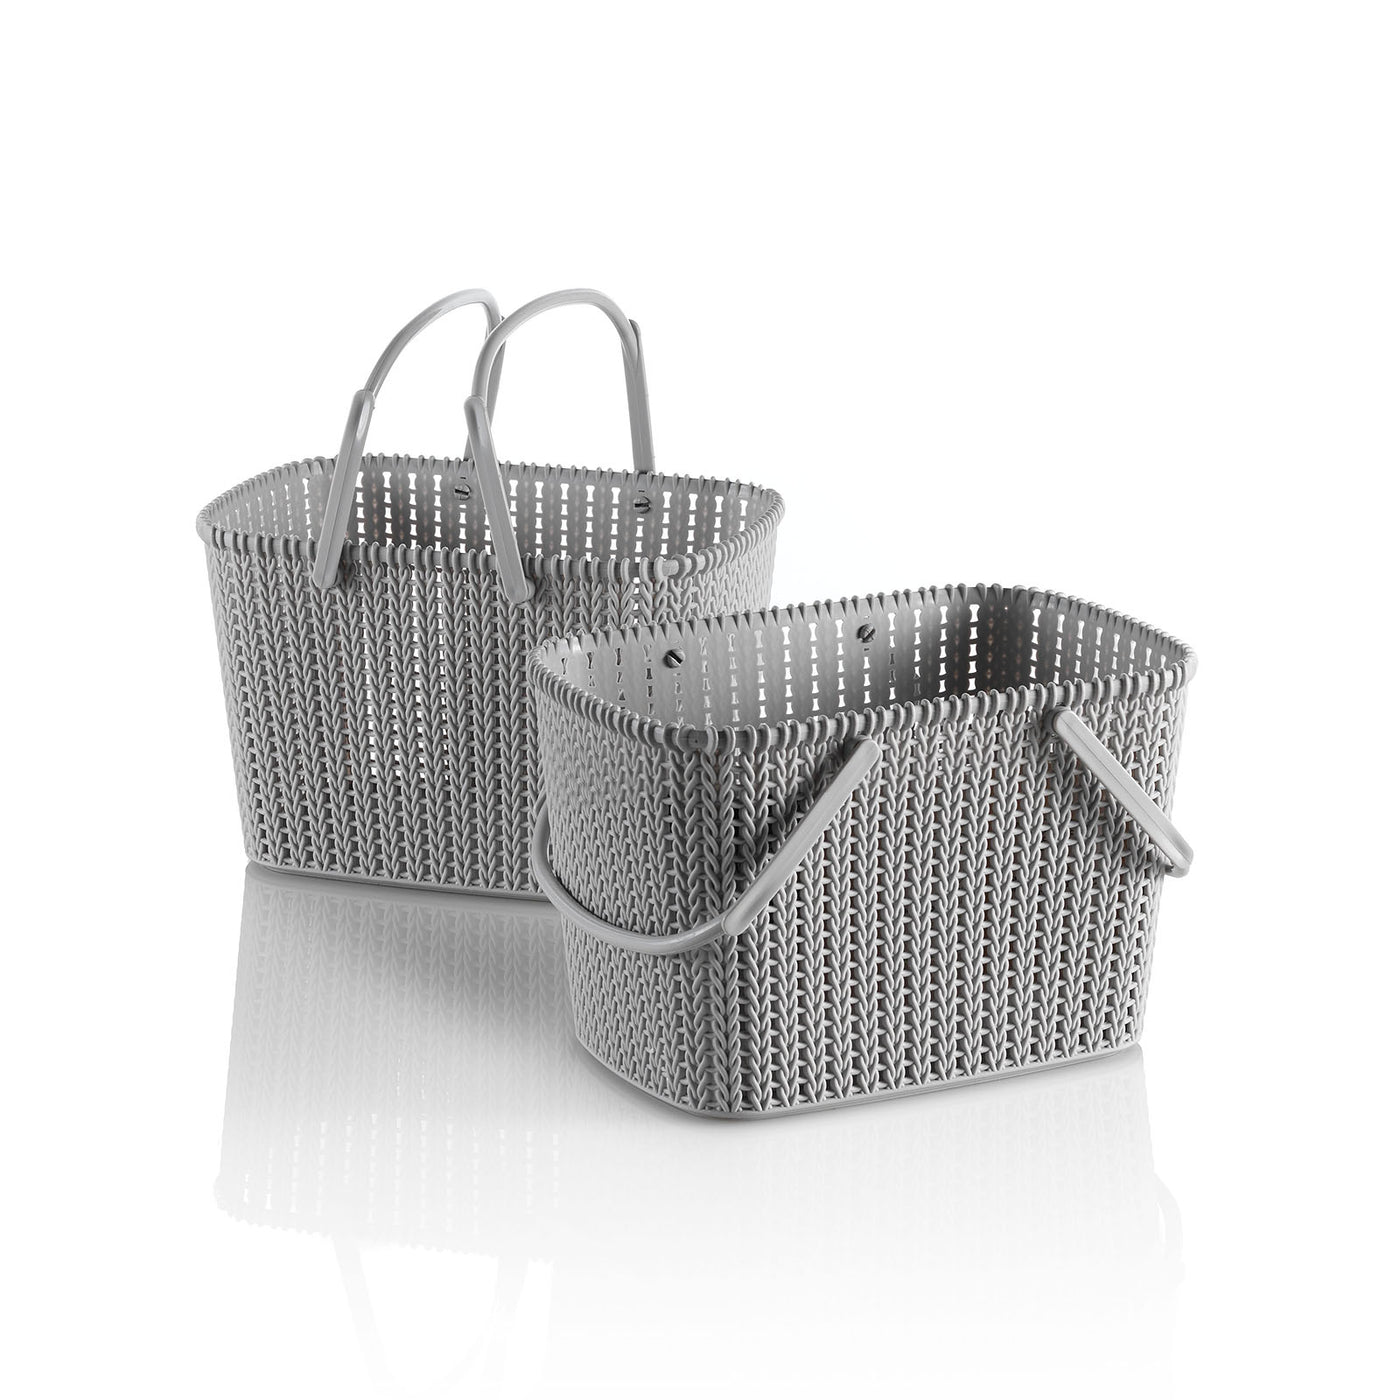 Set of 2 gray MARL storage baskets with handle